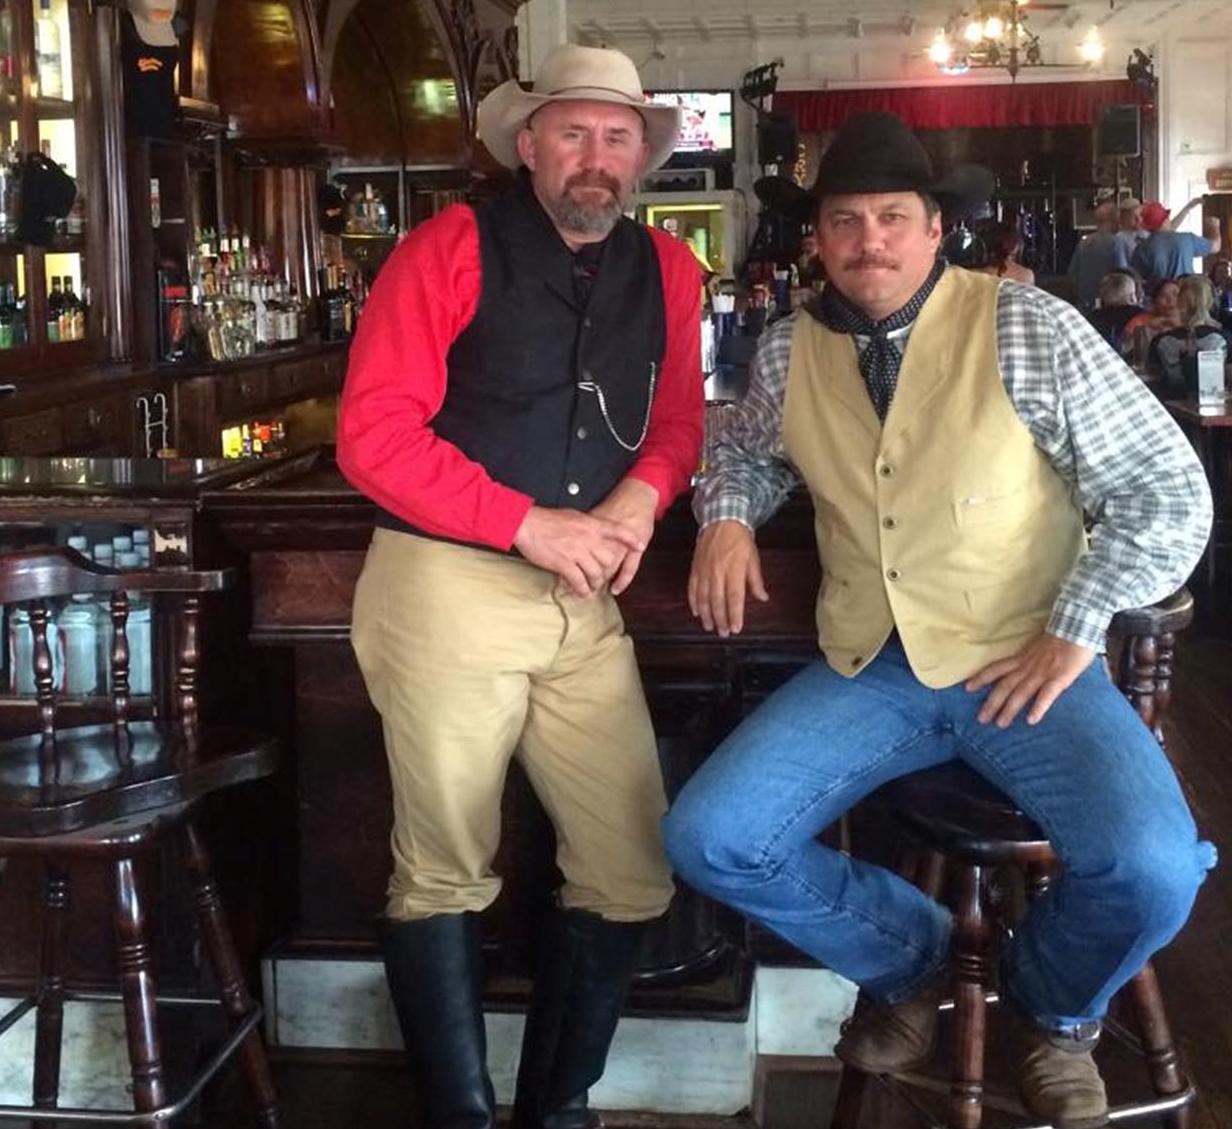 Glynn Praesel, producer and host of Cowboys and Heroes, with Shawn Dunham, horse wrangler.